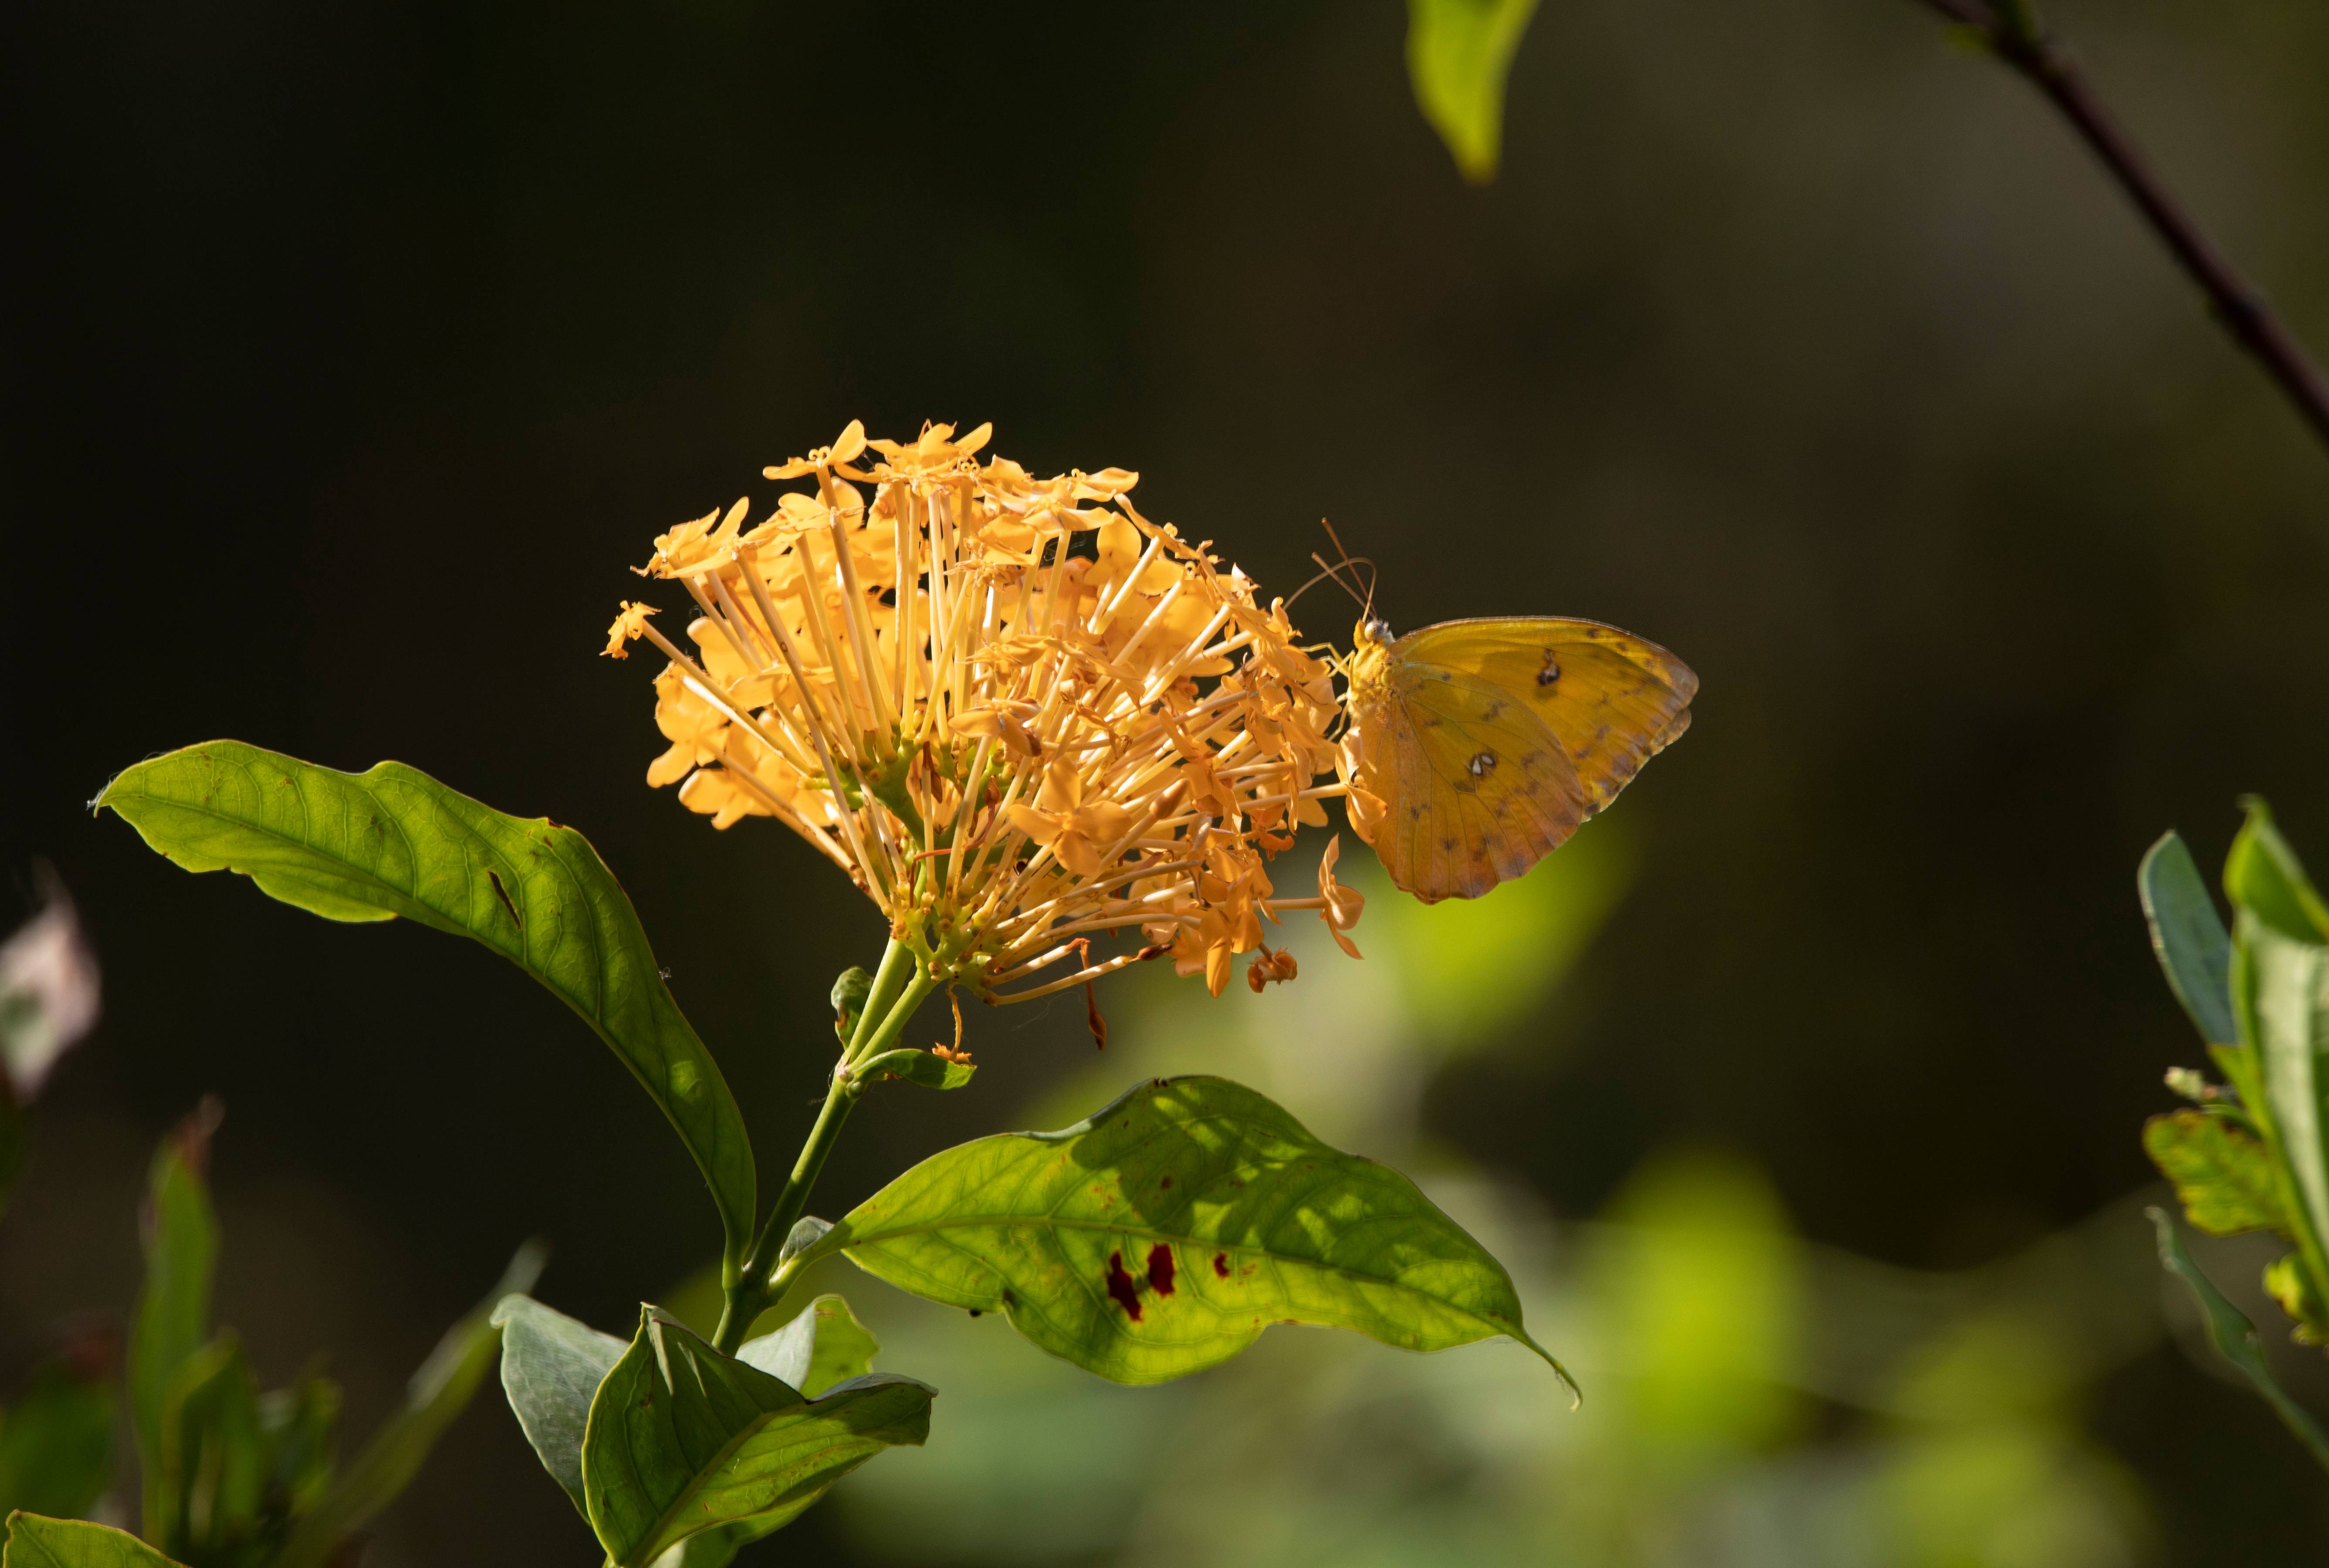 Butterfly Color Matched to Flower, Costa Rica